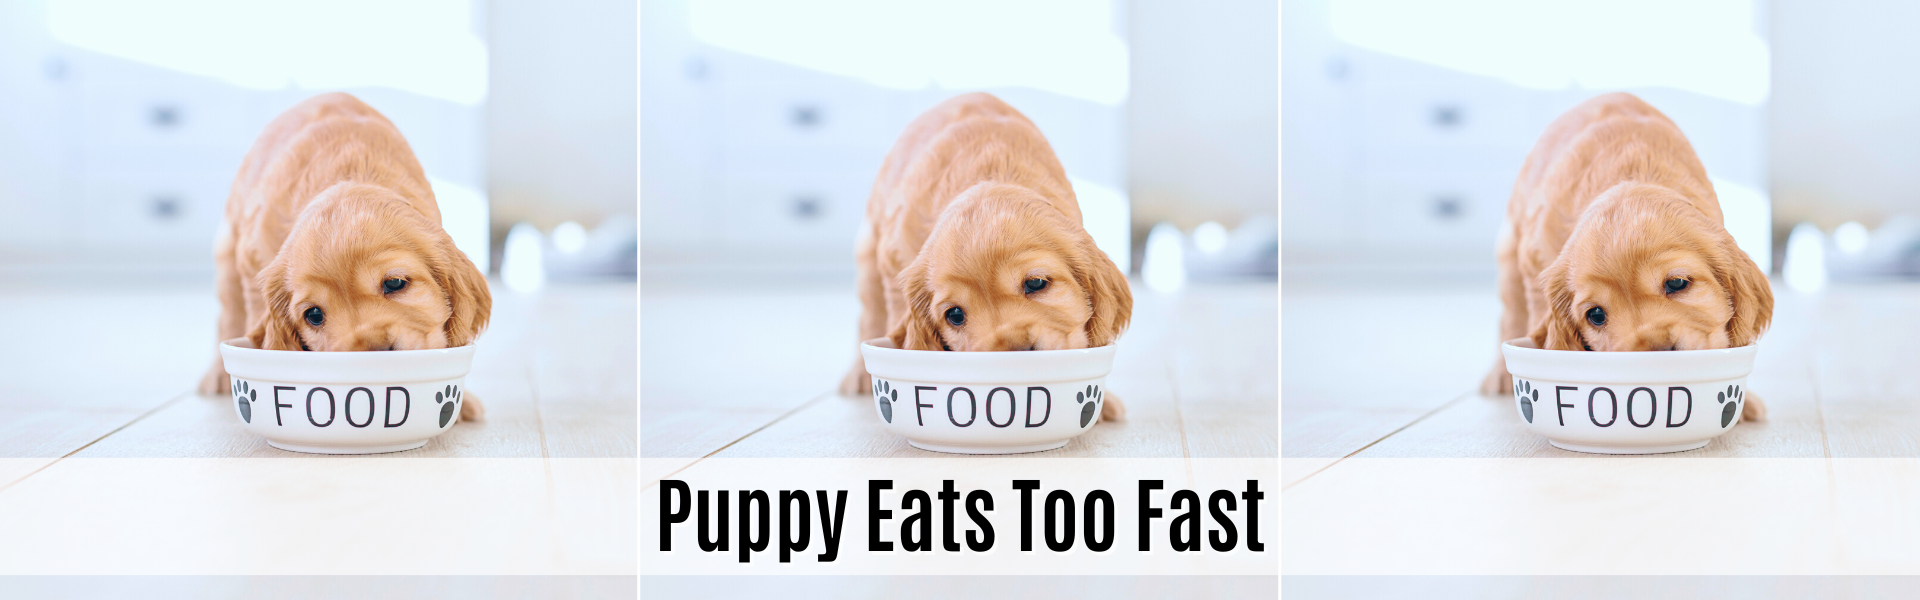 puppy eats too fast 